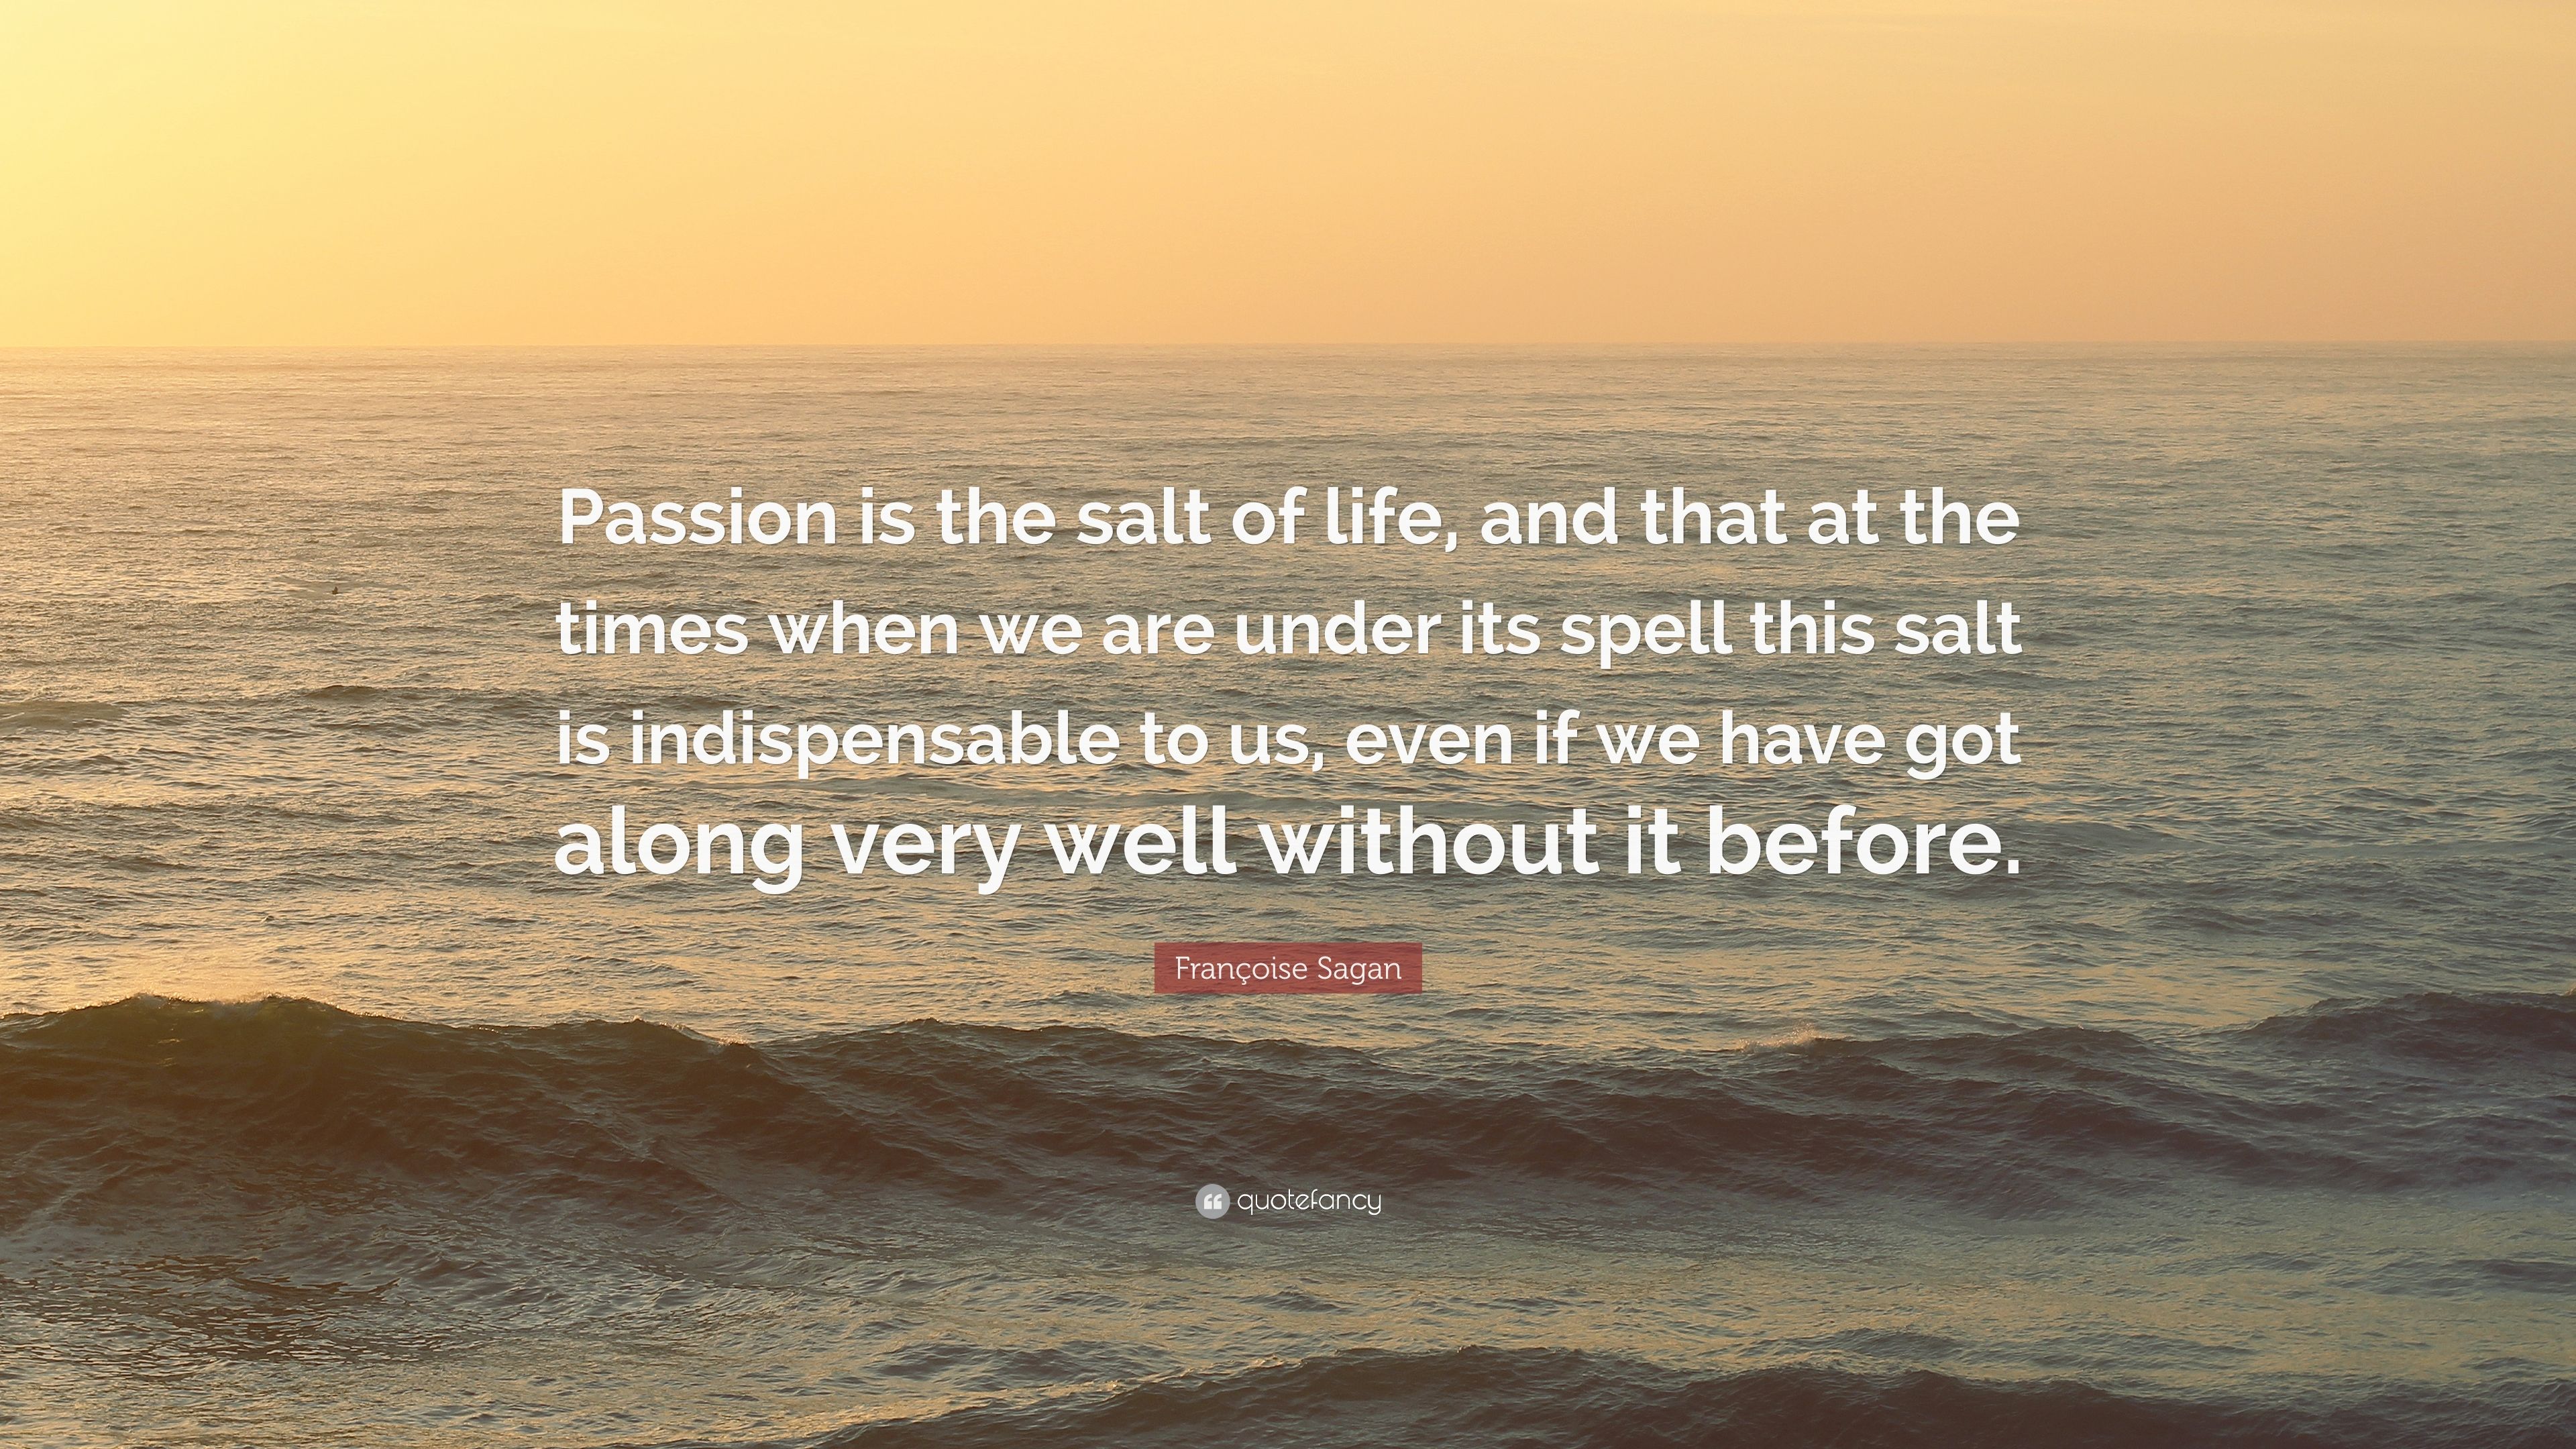 Françoise Sagan Quote: “Passion is the salt of life, and that